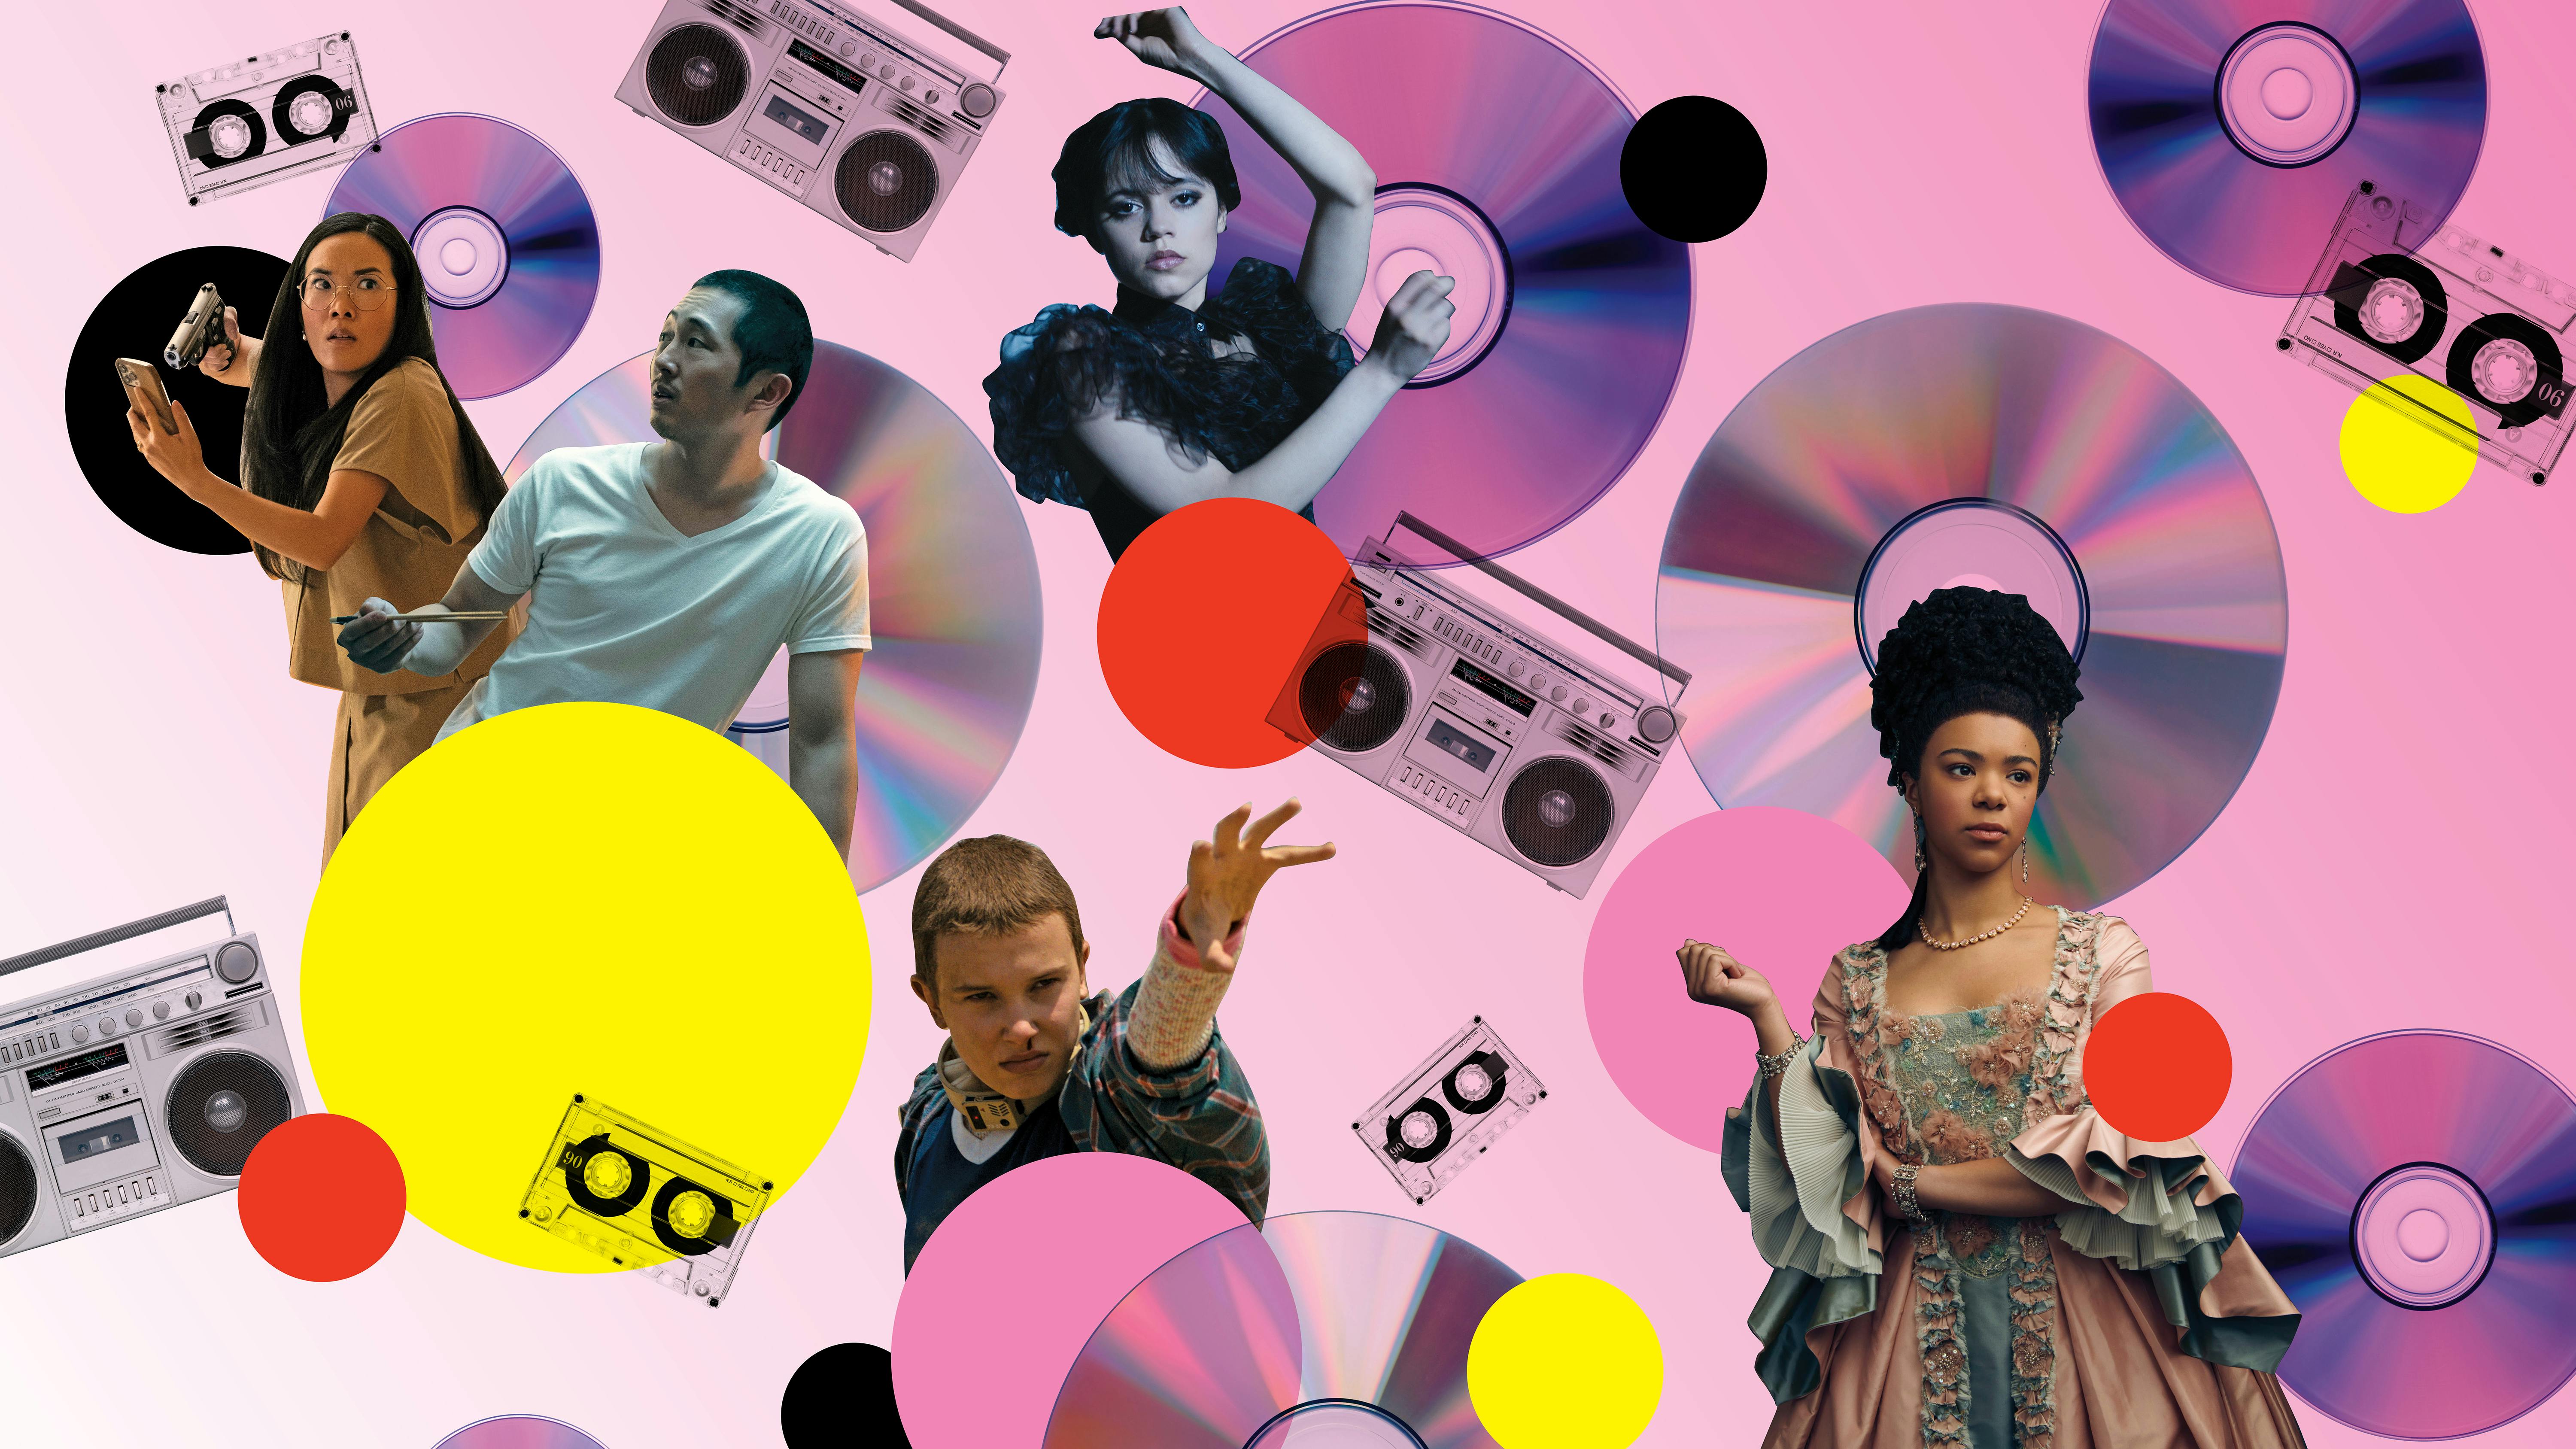 A collage of Amy Lau, Danny Cho, Wednesday, Eleven, and Queen Charlotte; some CDs, cassettes, and boomboxes; red, pink, and yellow dots against a pink background.